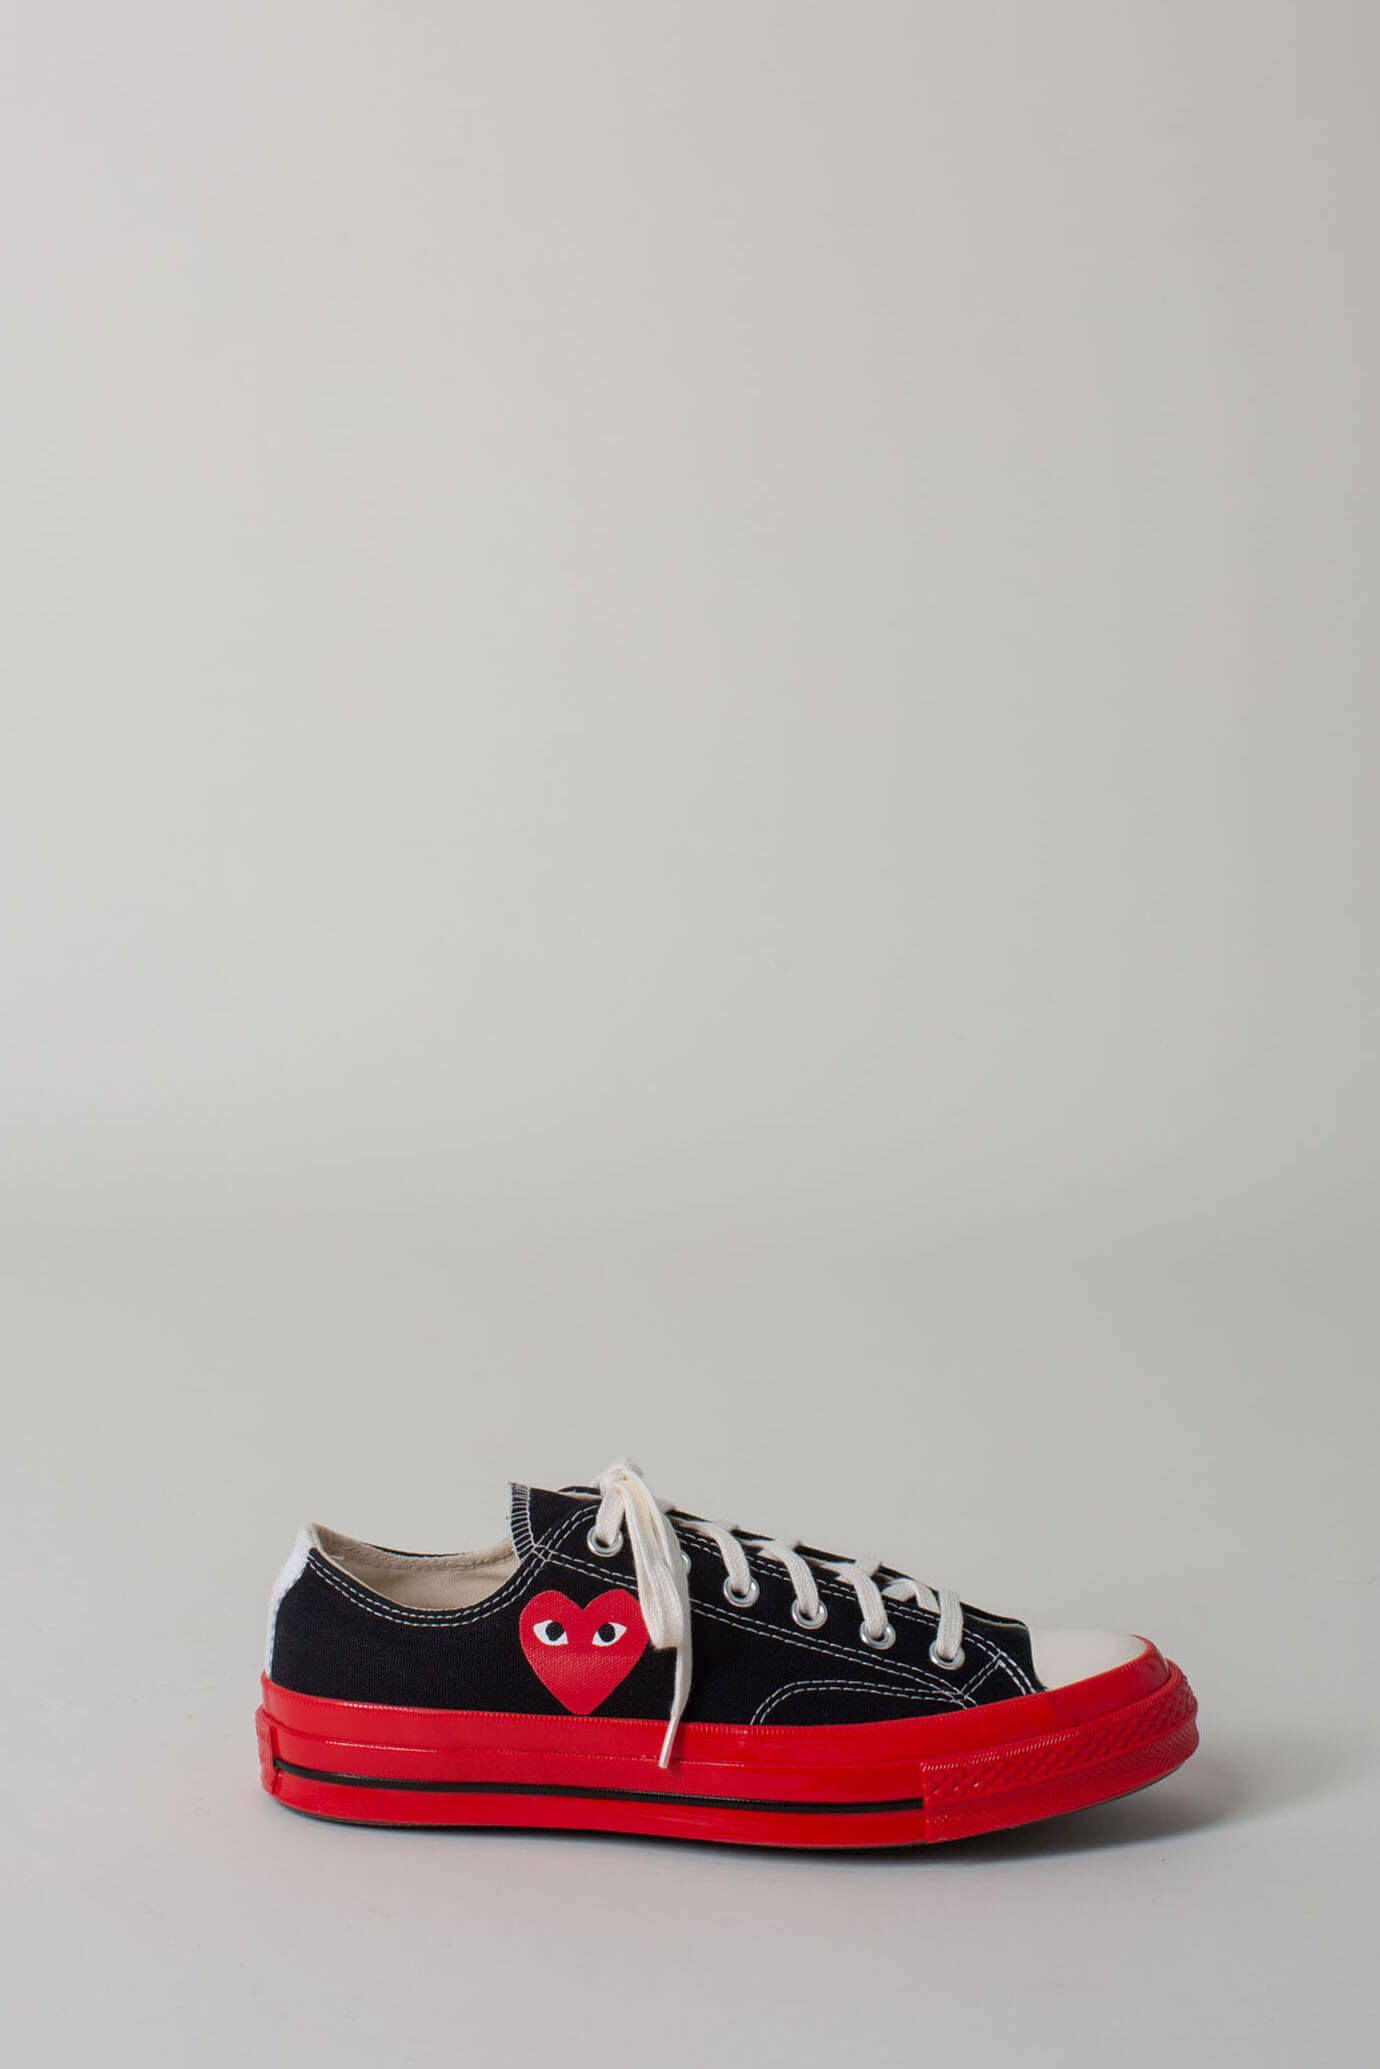 Converse CDG Play Low Red Sole